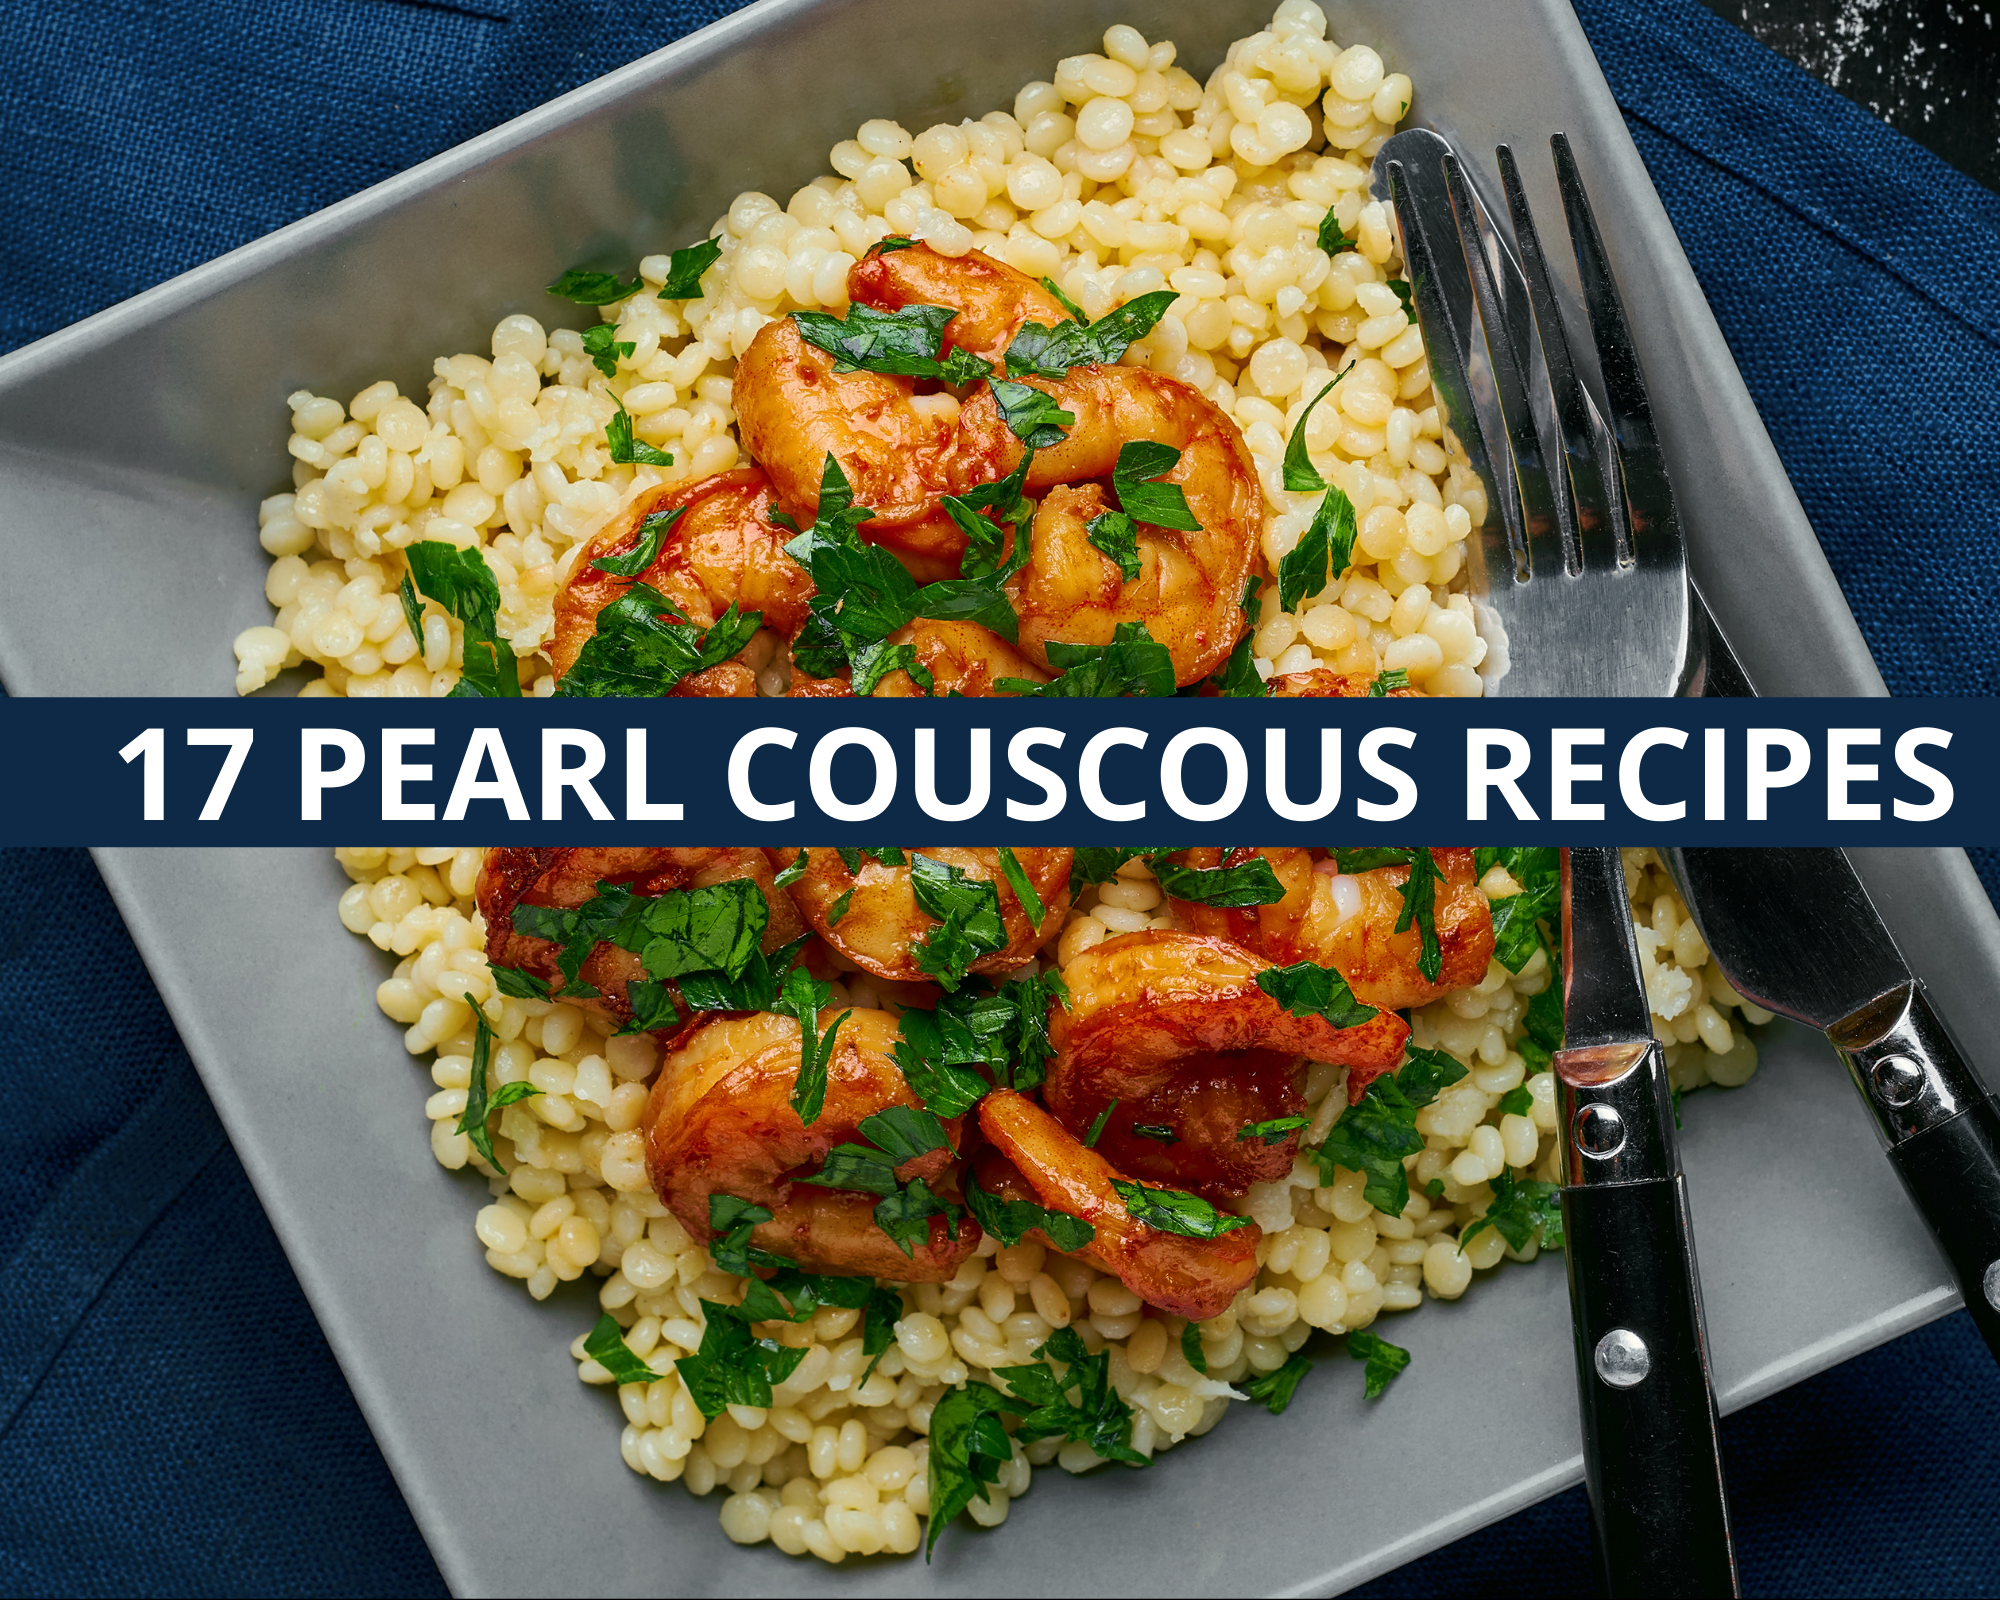 Pearl couscous recipes